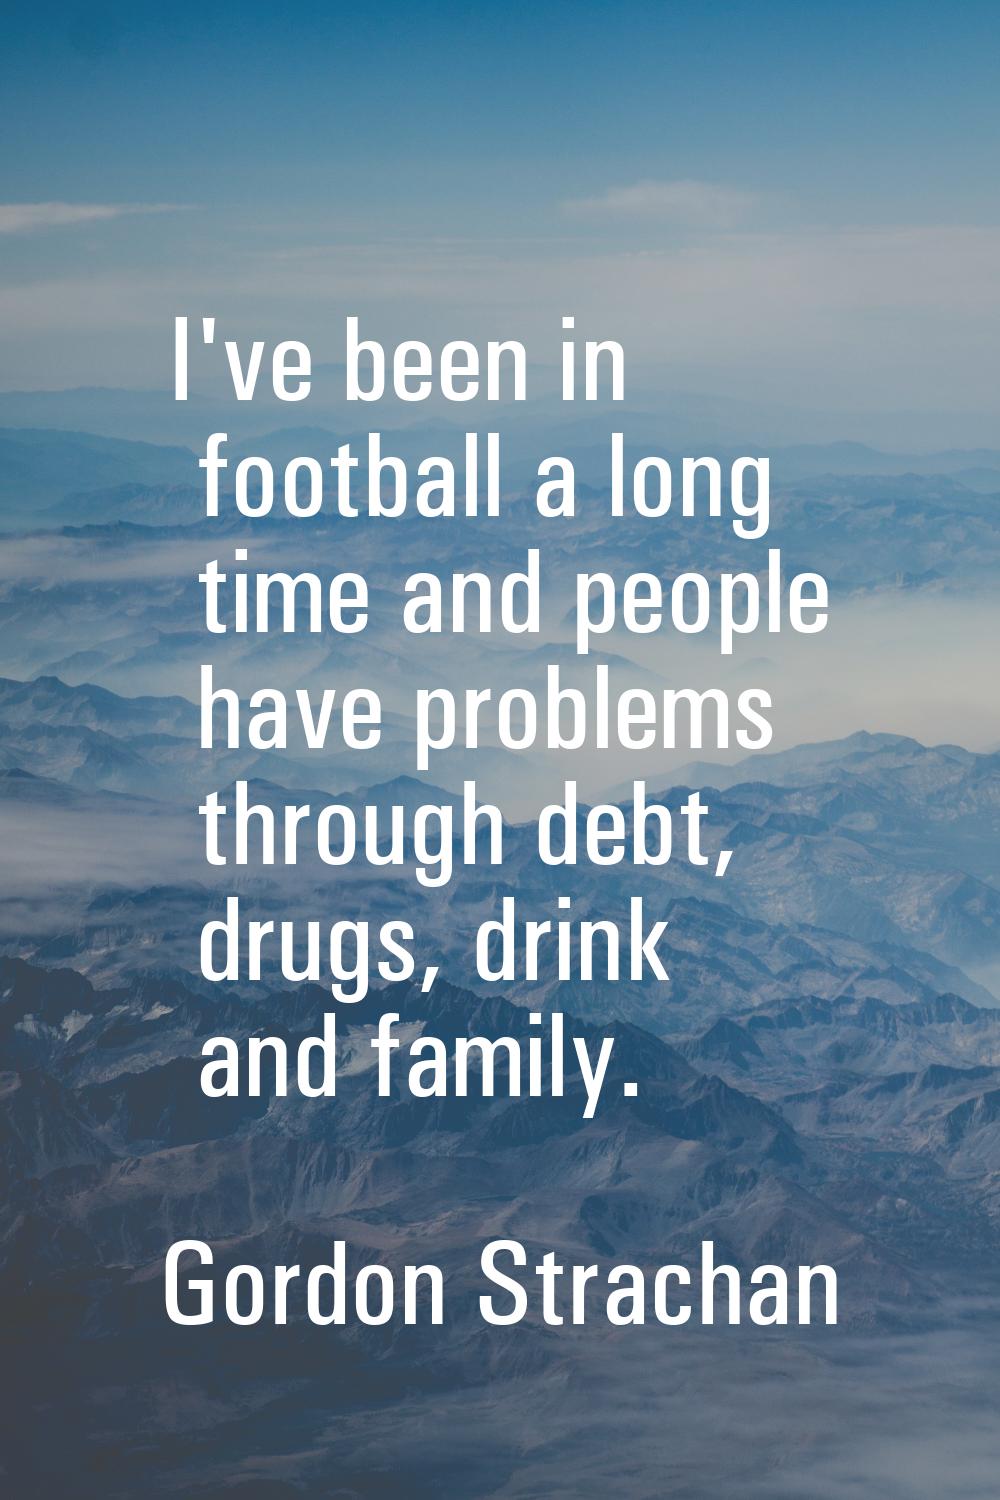 I've been in football a long time and people have problems through debt, drugs, drink and family.